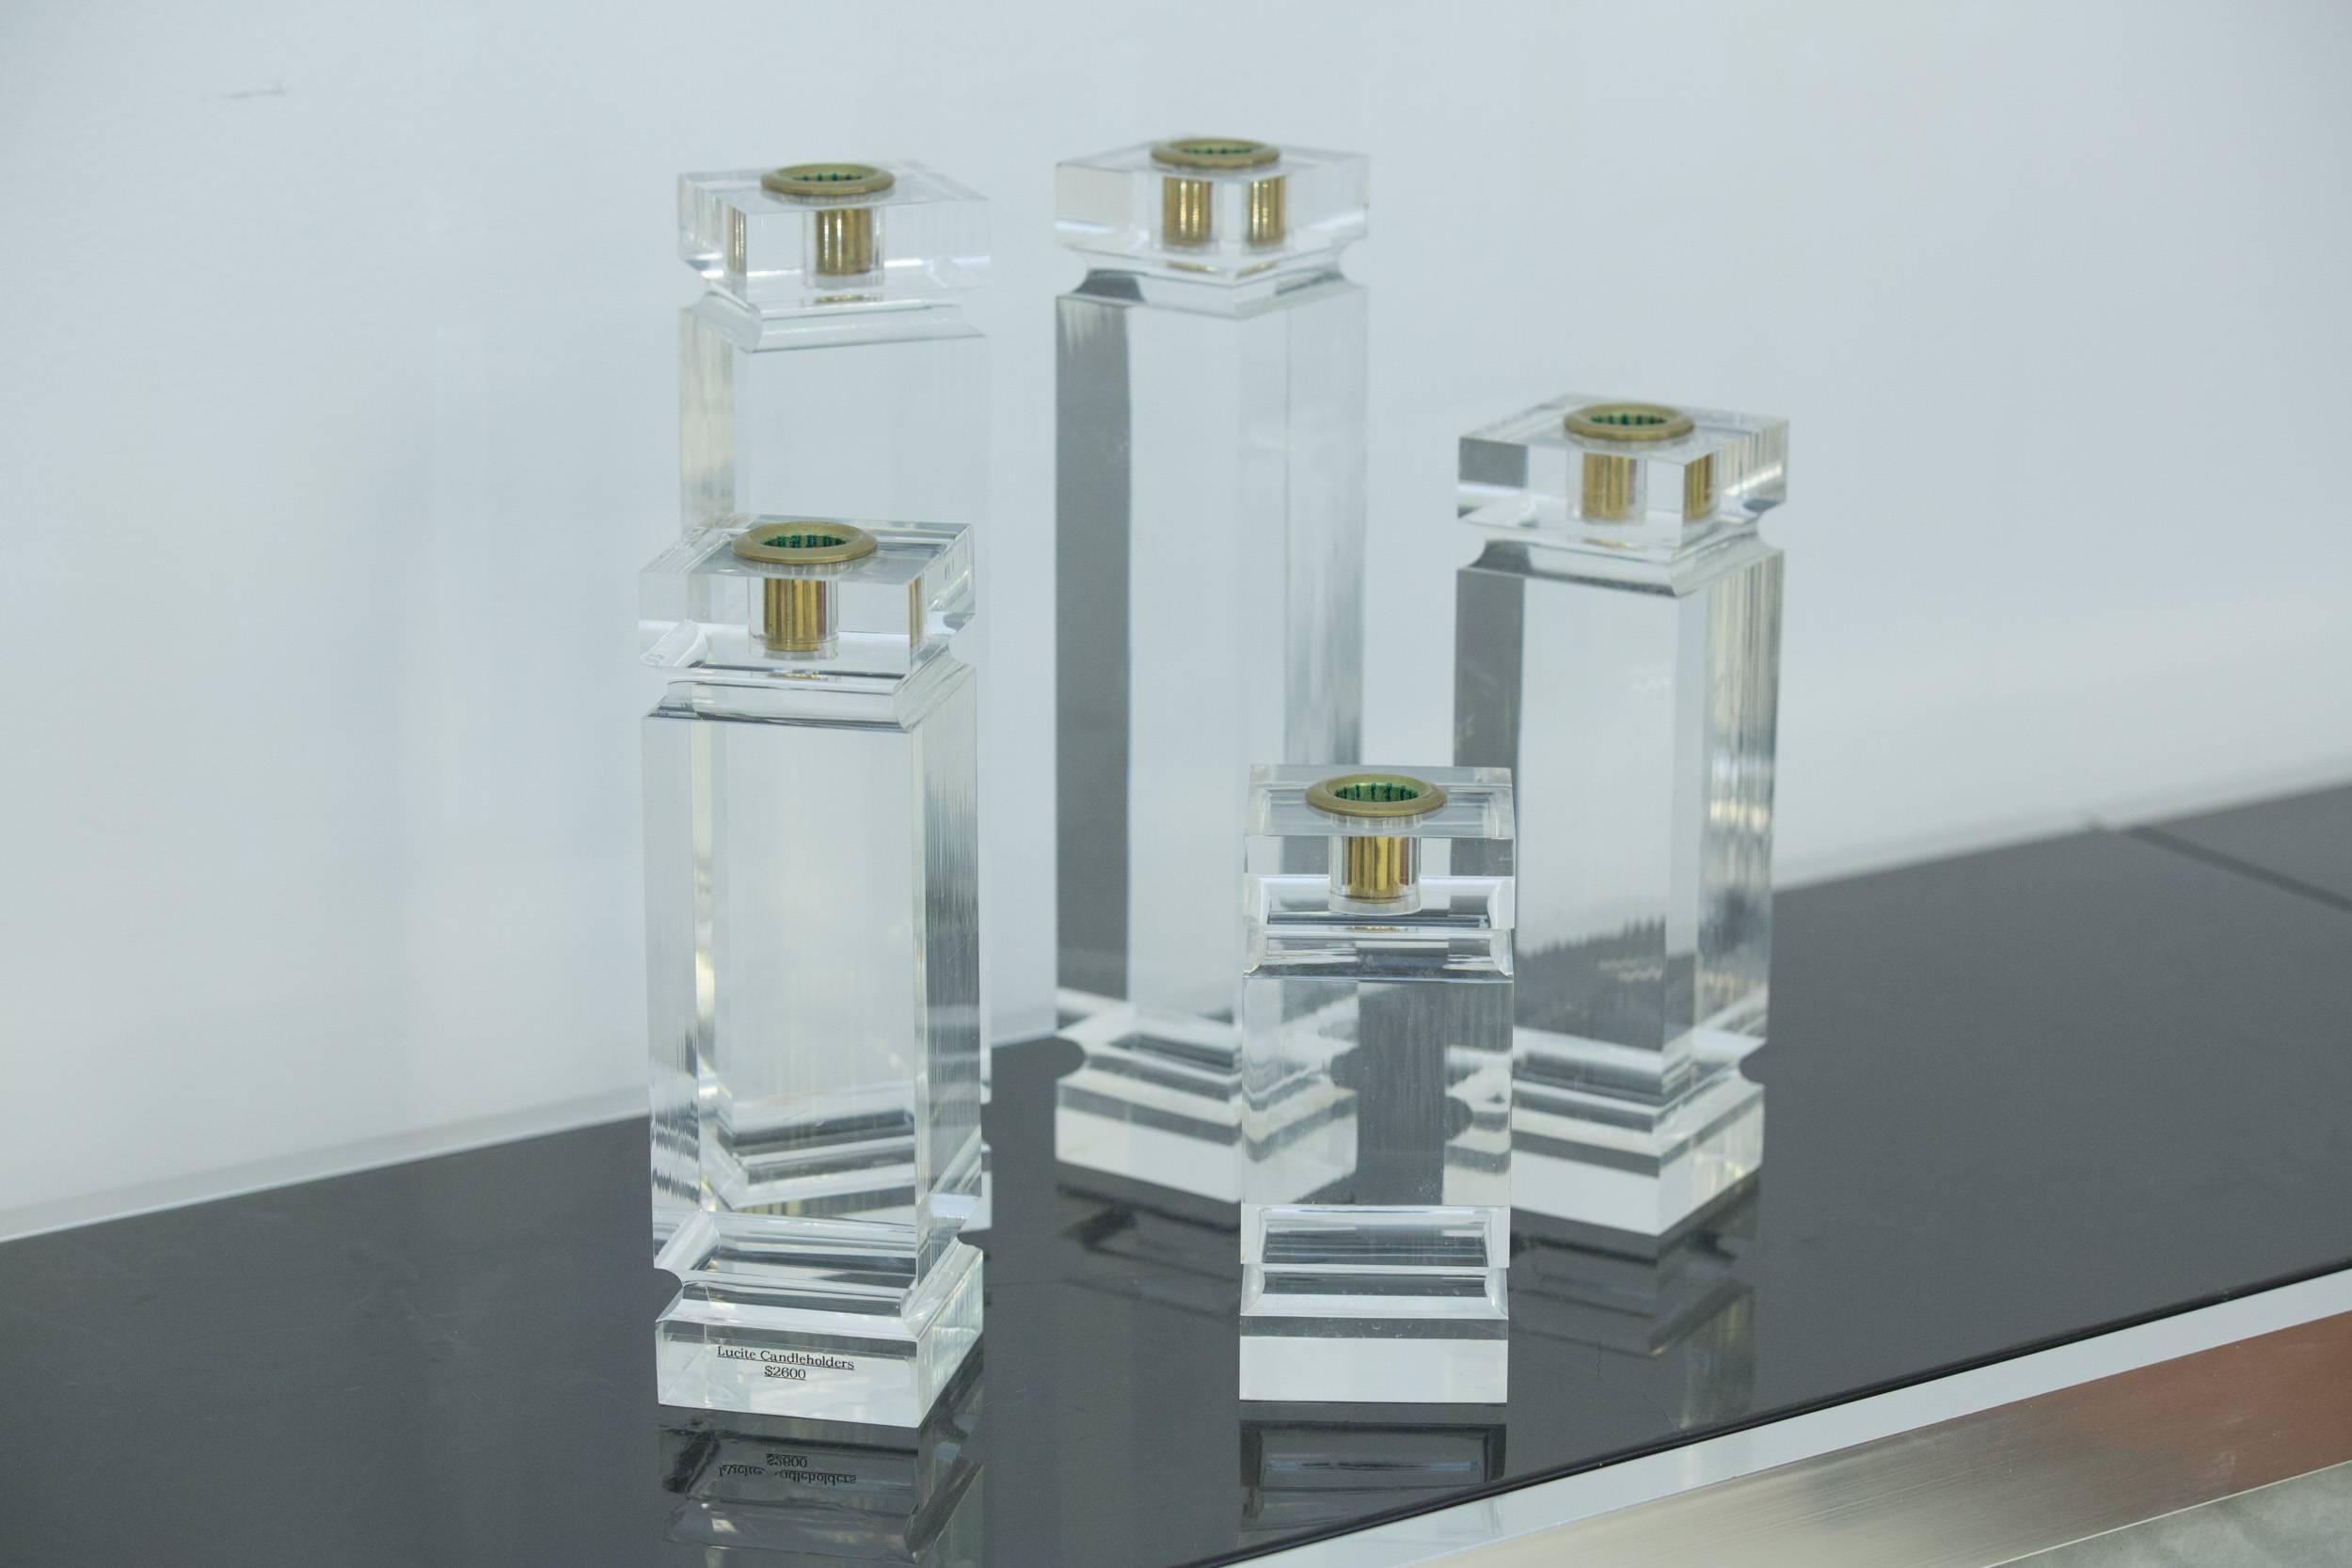 Set of five square solid Lucite candleholders 
with brass inserts.
Measures: 3" SQ x 12.5" H or 9.5" H and 6.5" H.